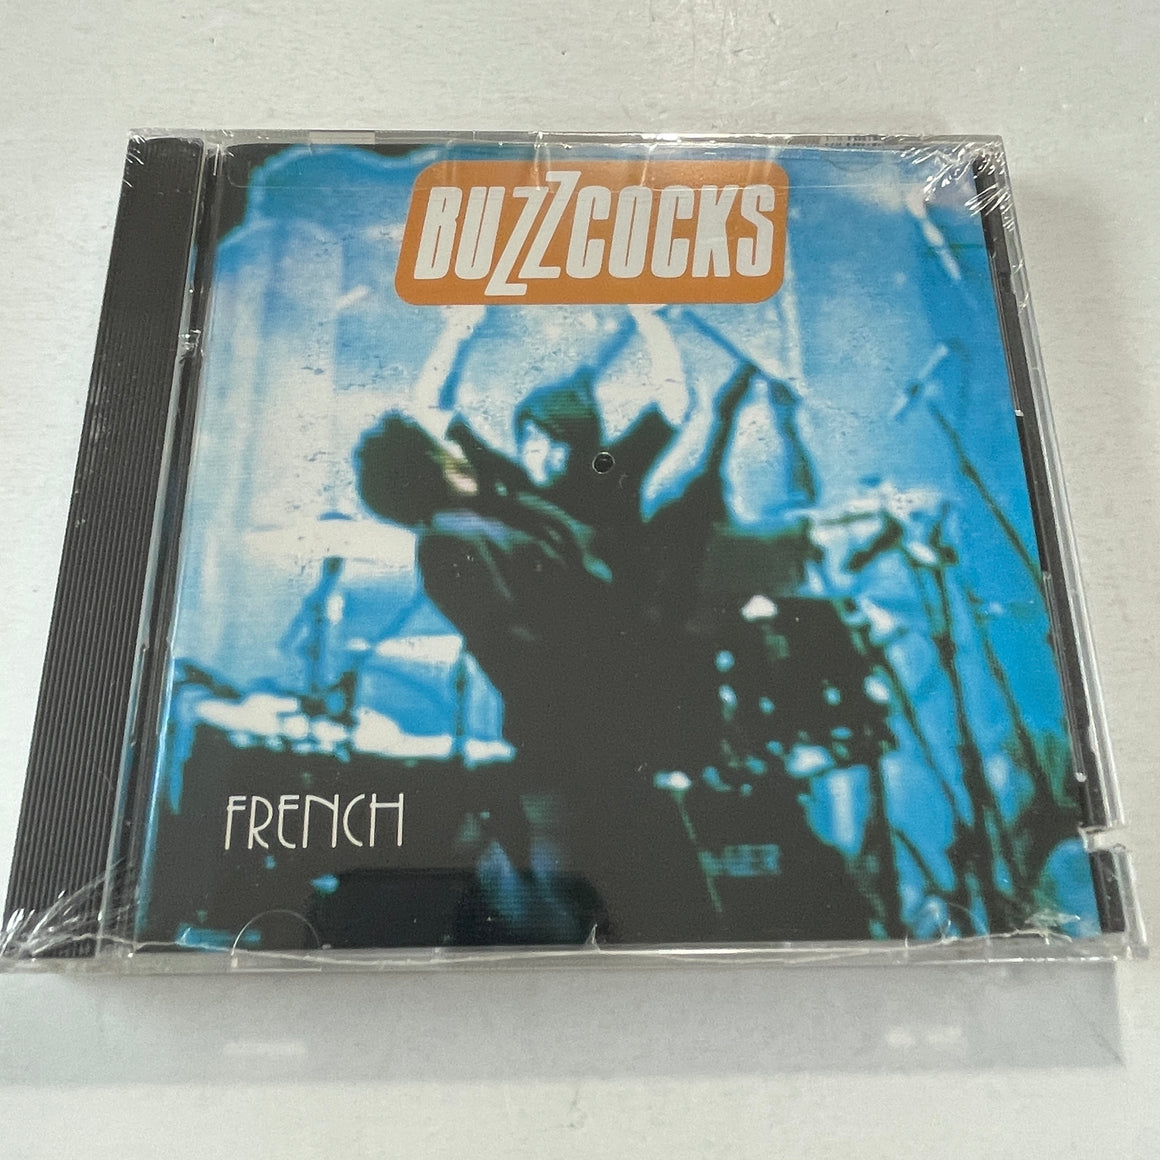 Buzzcocks – French New Sealed CD M\VG+ I.R.S. Records – 72438 36761 25